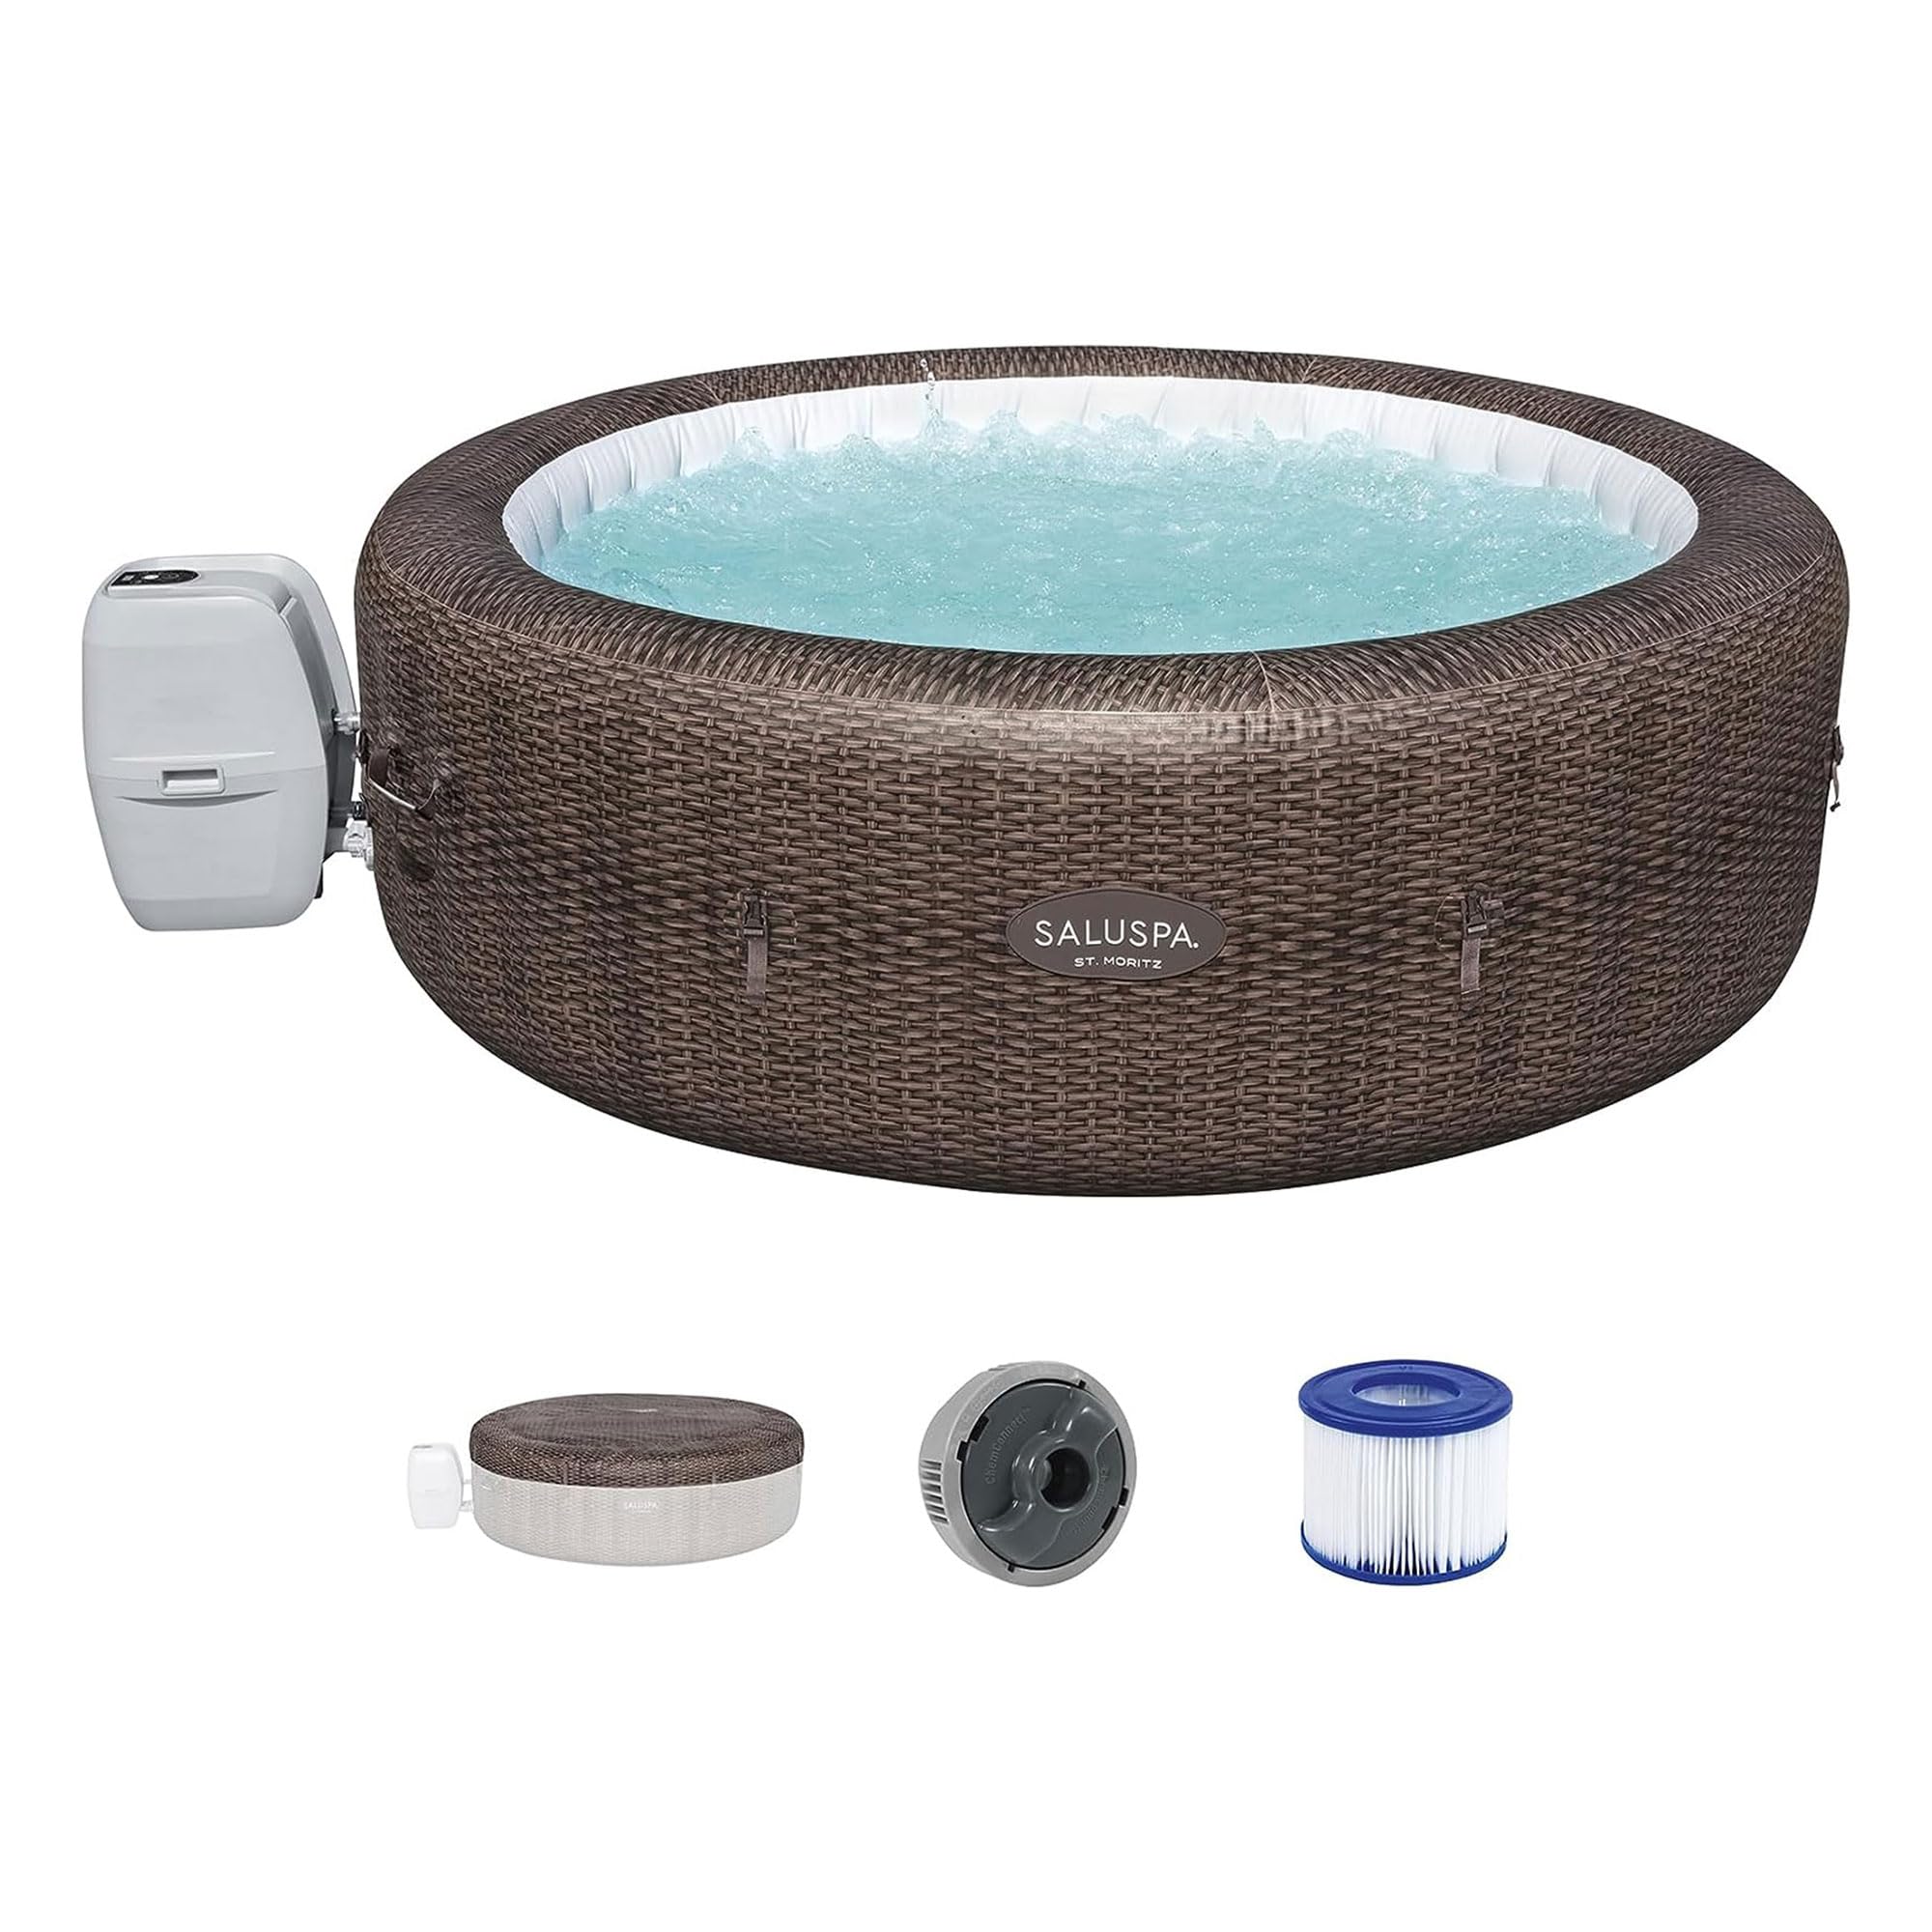 Bestway SaluSpa St Moritz AirJet Hot Tub with Set of 4 Non Slip Pool and Spa Seats and Set of 4 Padded Headrest Pillows with Adjustable Strap, Brown